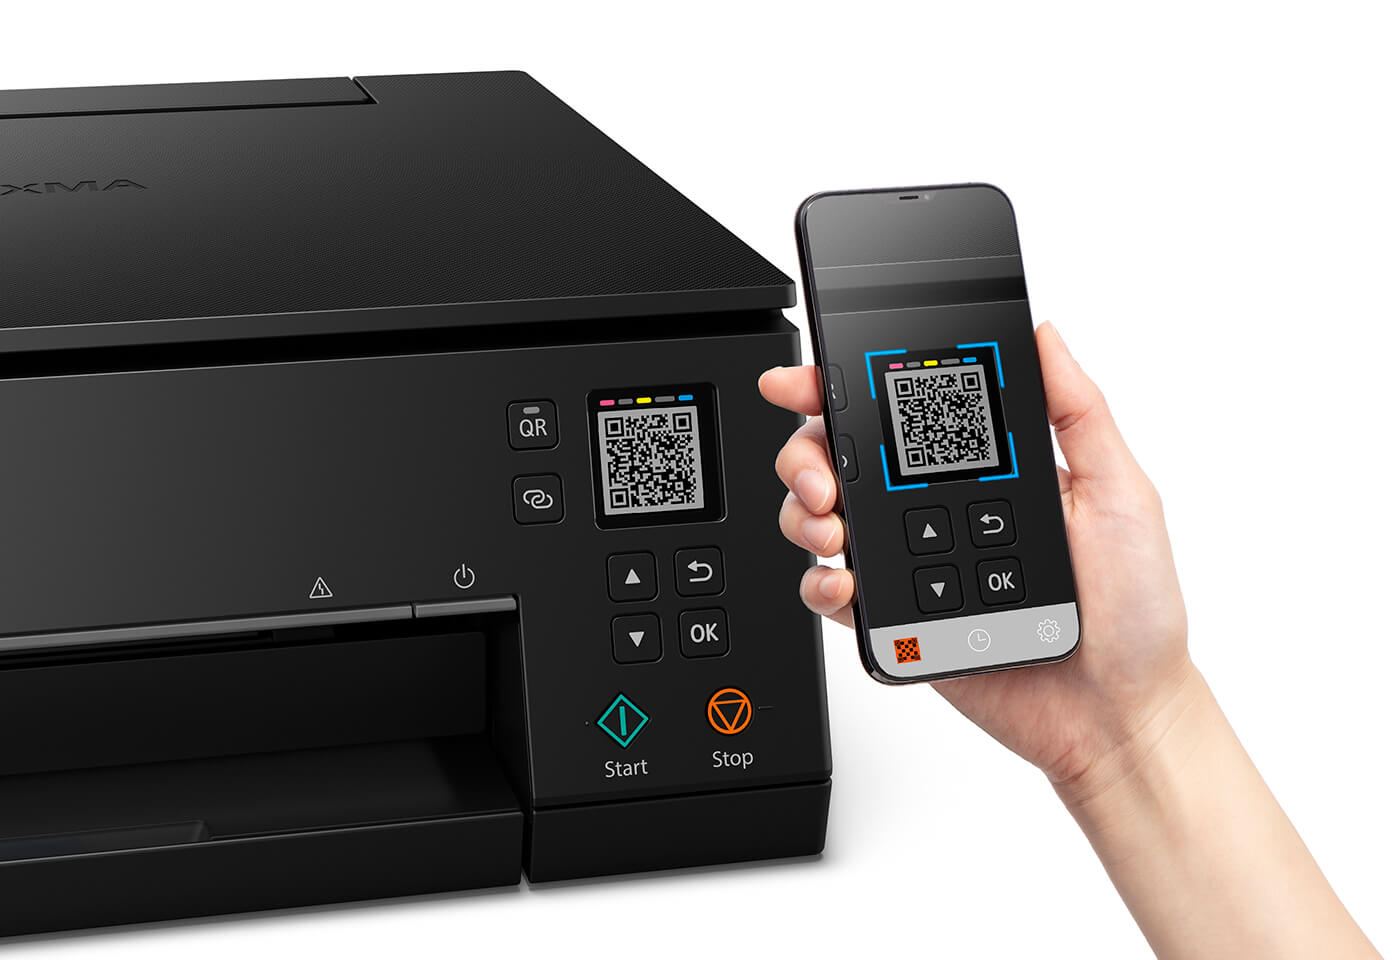 Print wirelessly with QR code